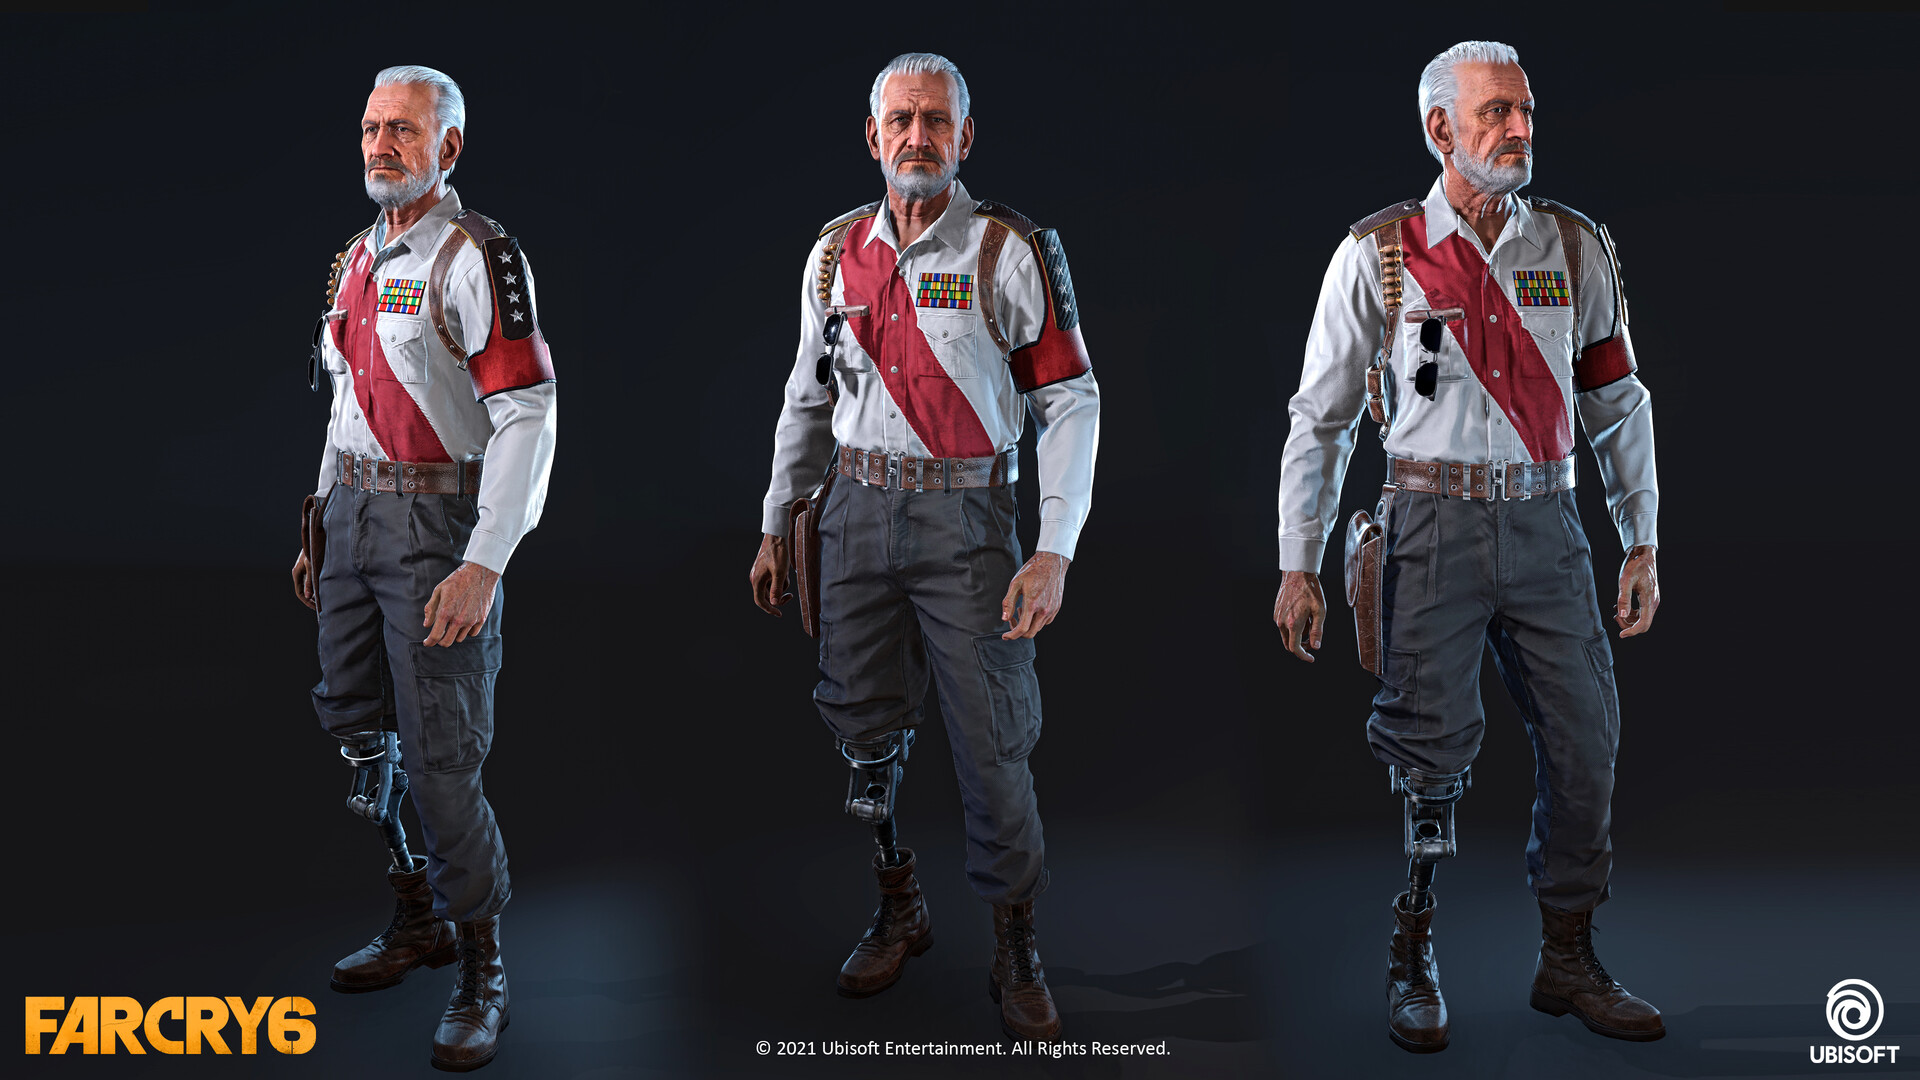 ArtStation - Farcry 6 Outfits